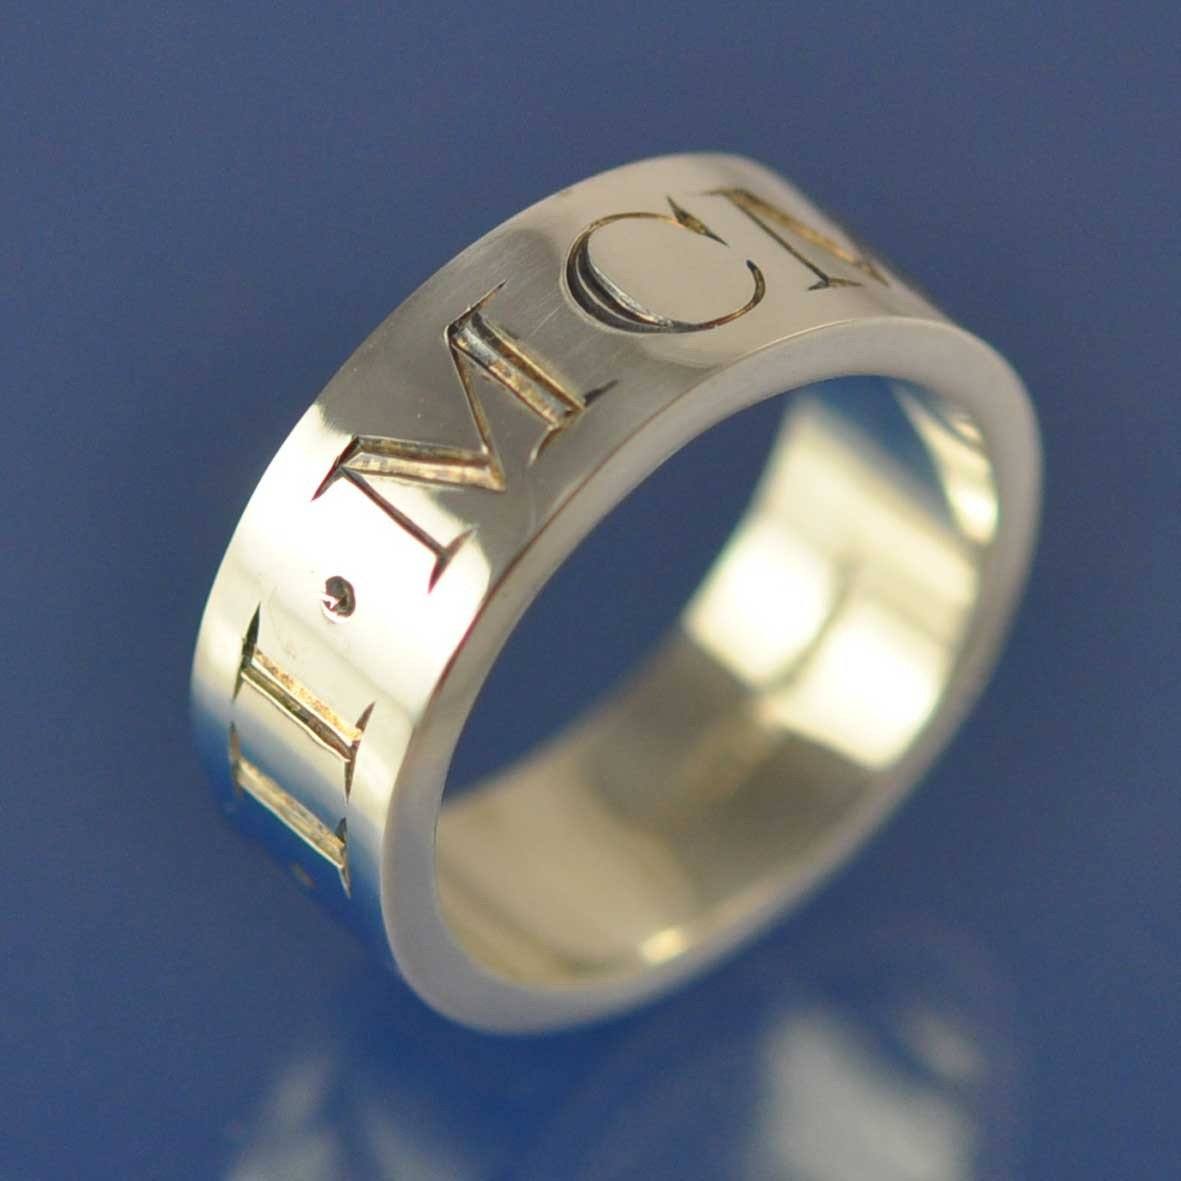 Roman Numeral Ring Ring by Chris Parry Jewellery